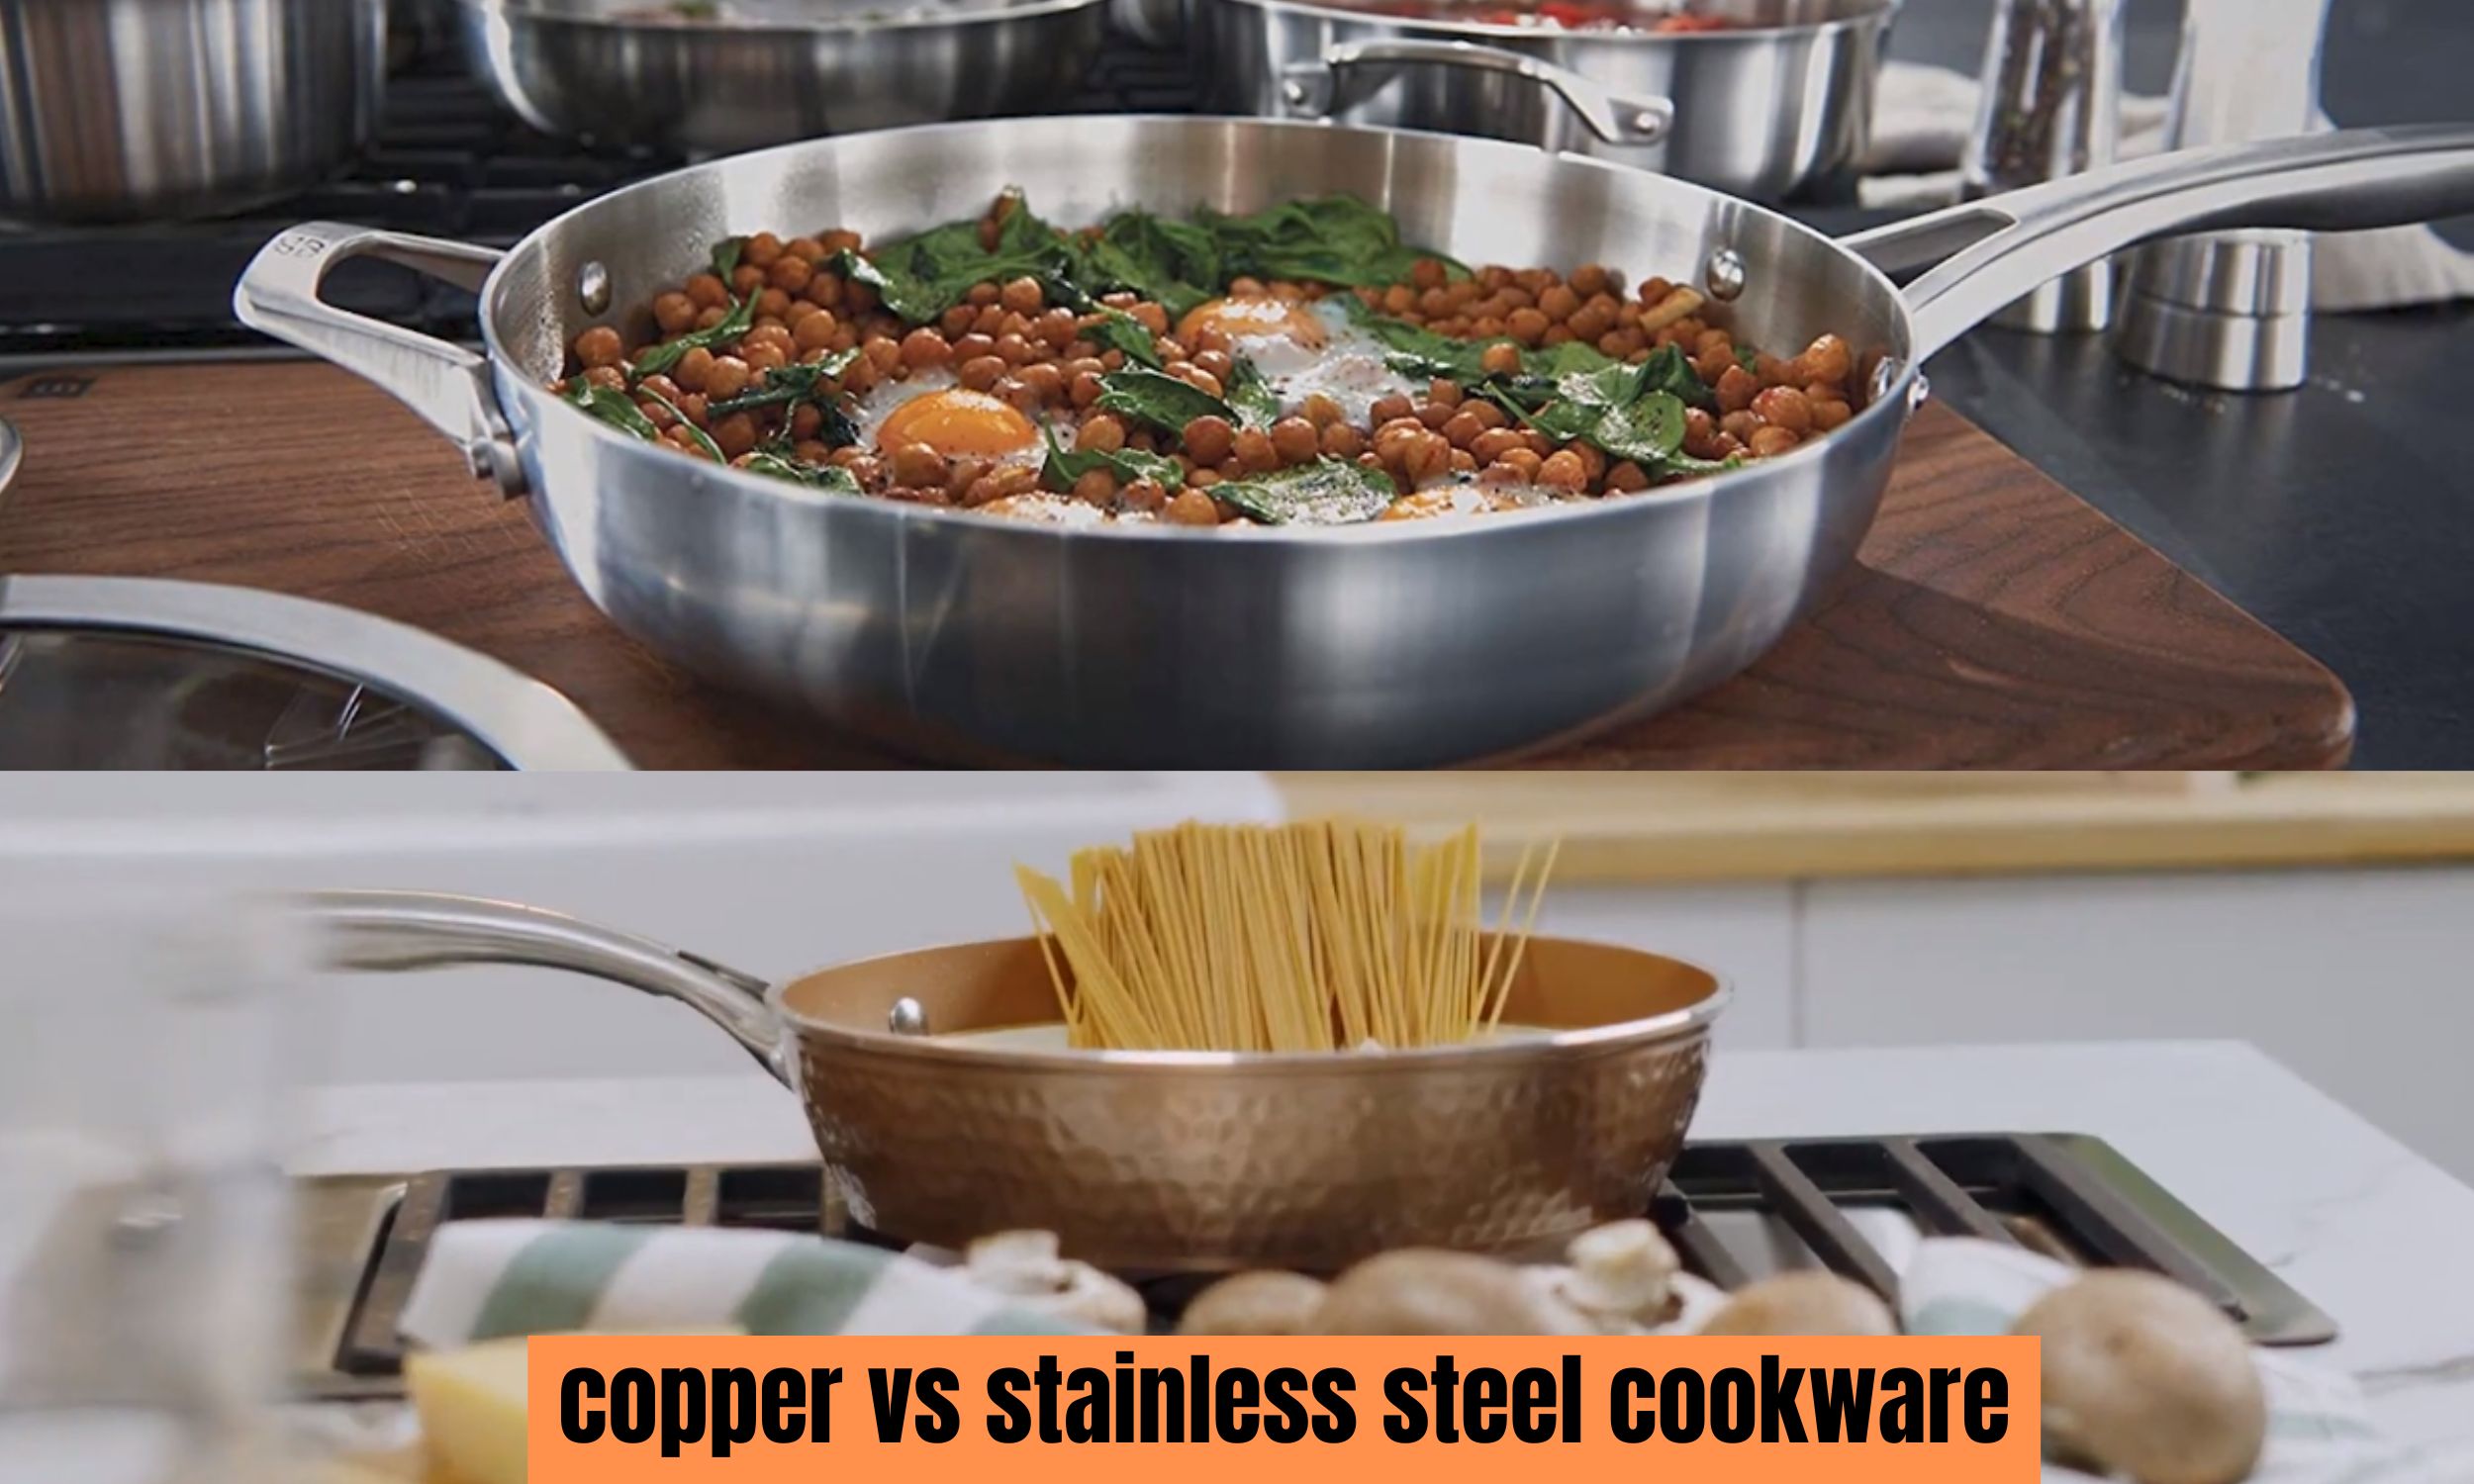 Copper vs stainless steel cookware